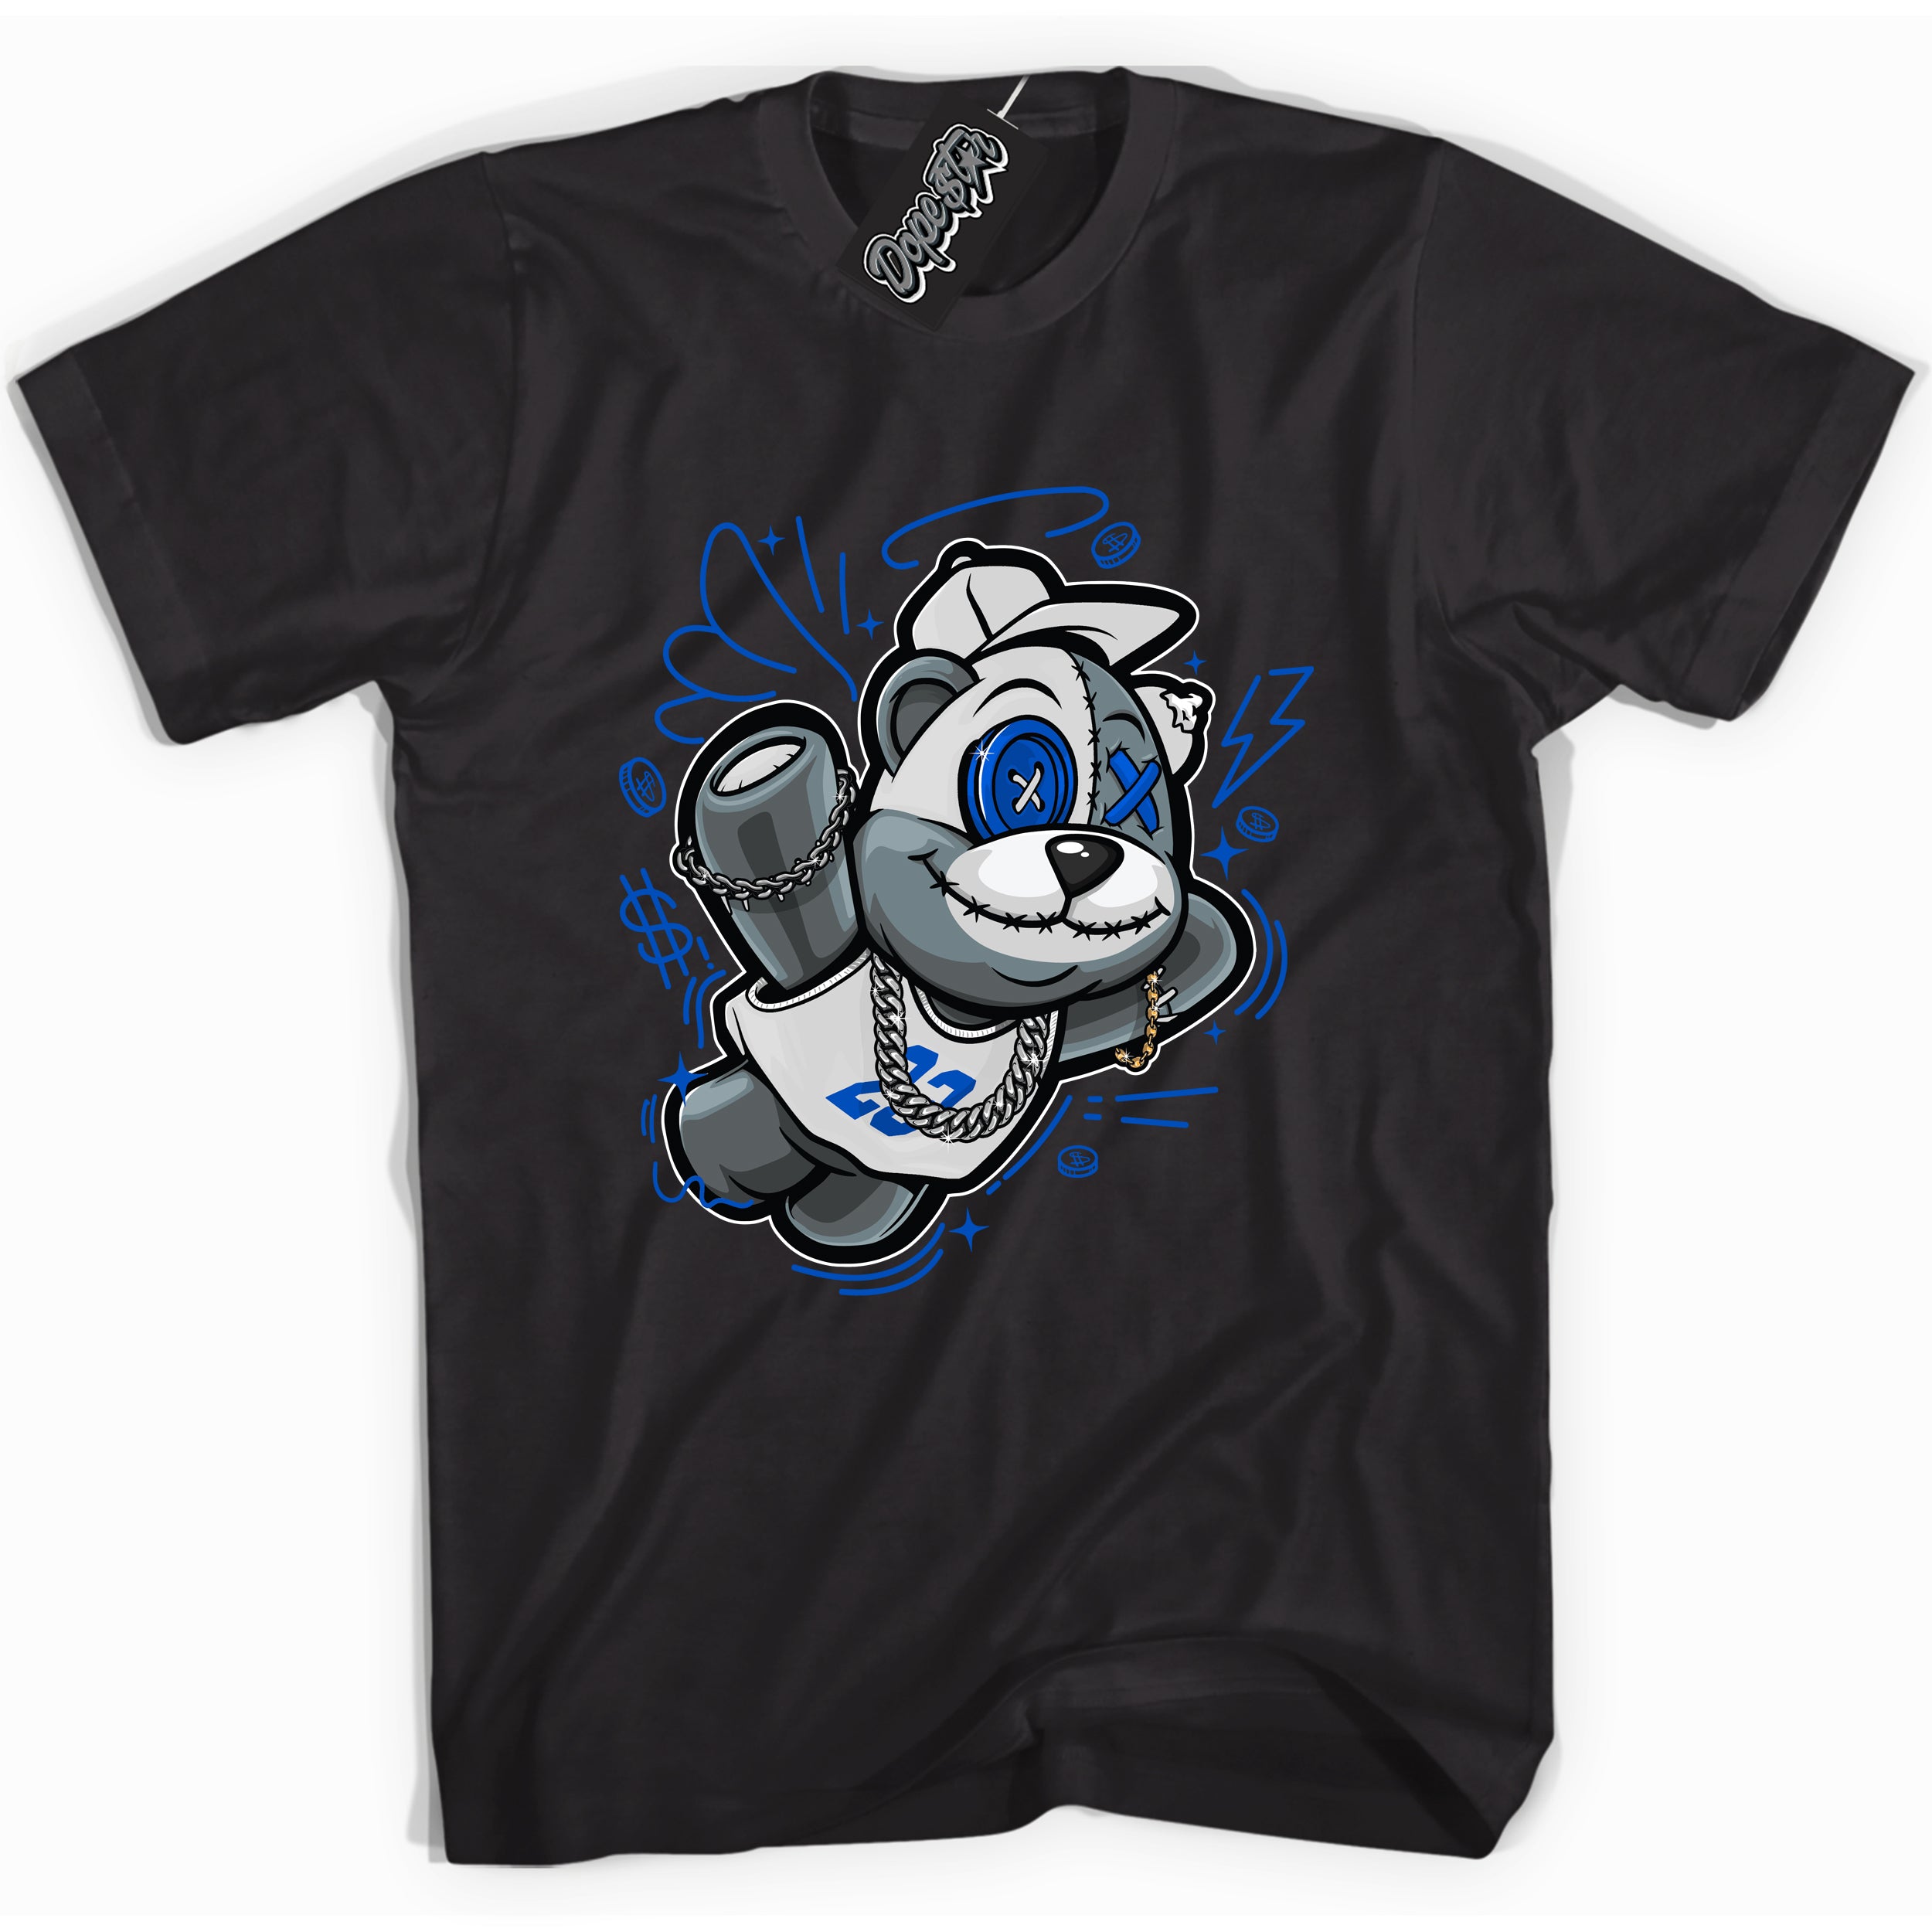 Cool Black graphic tee with Slam Dunk Bear print, that perfectly matches OG Royal Reimagined 1s sneakers 